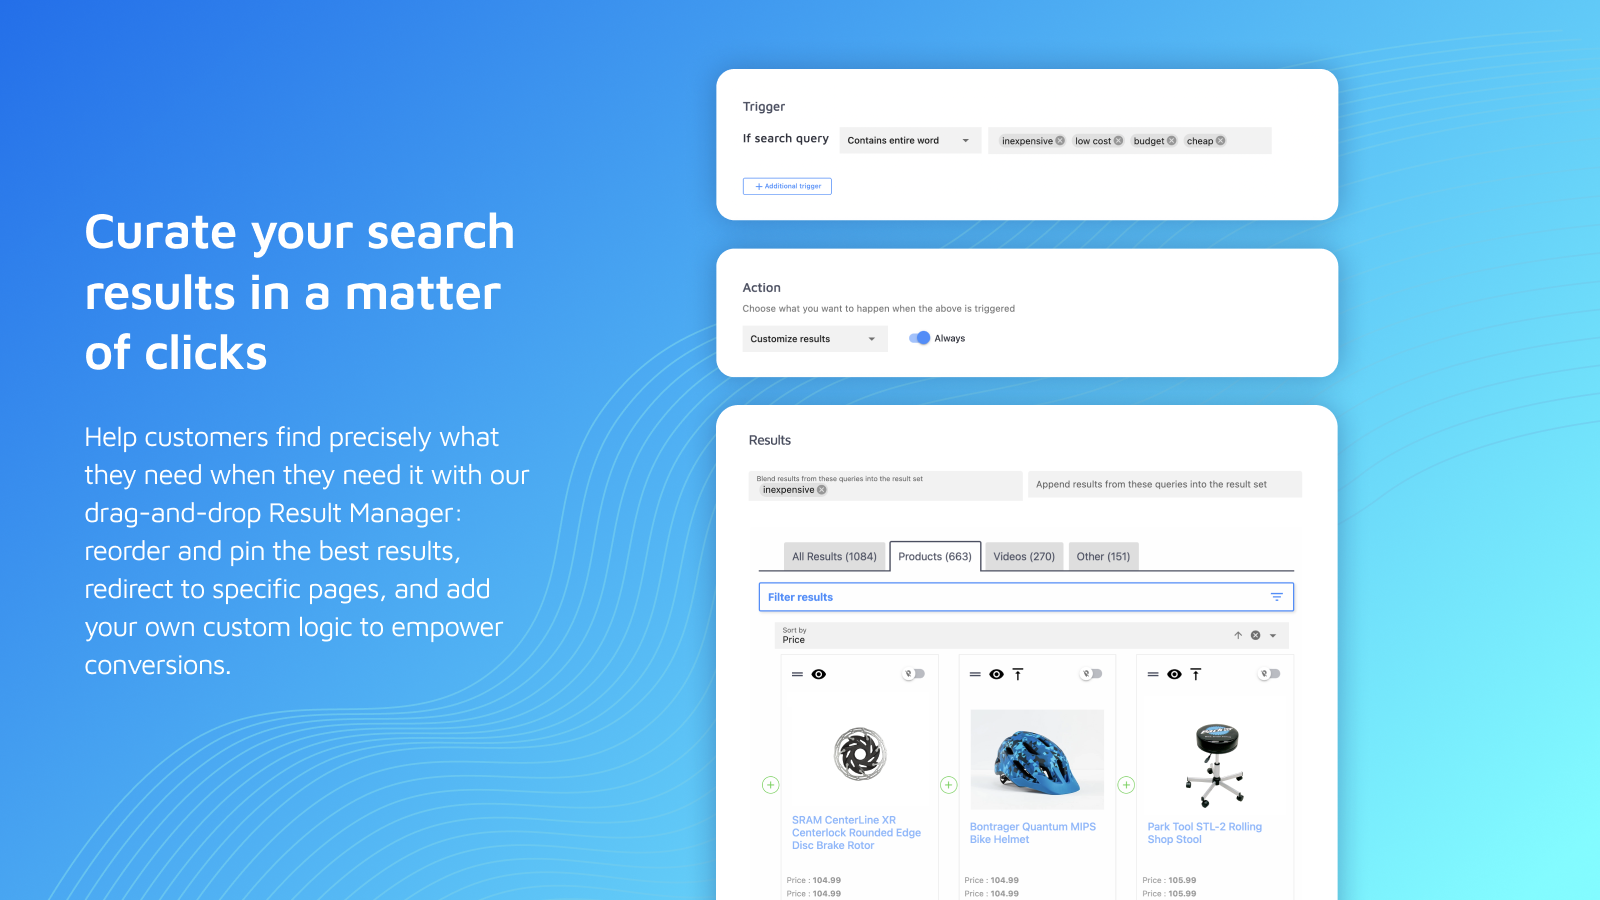 Optimize and promote search results to boost conversion and AOV